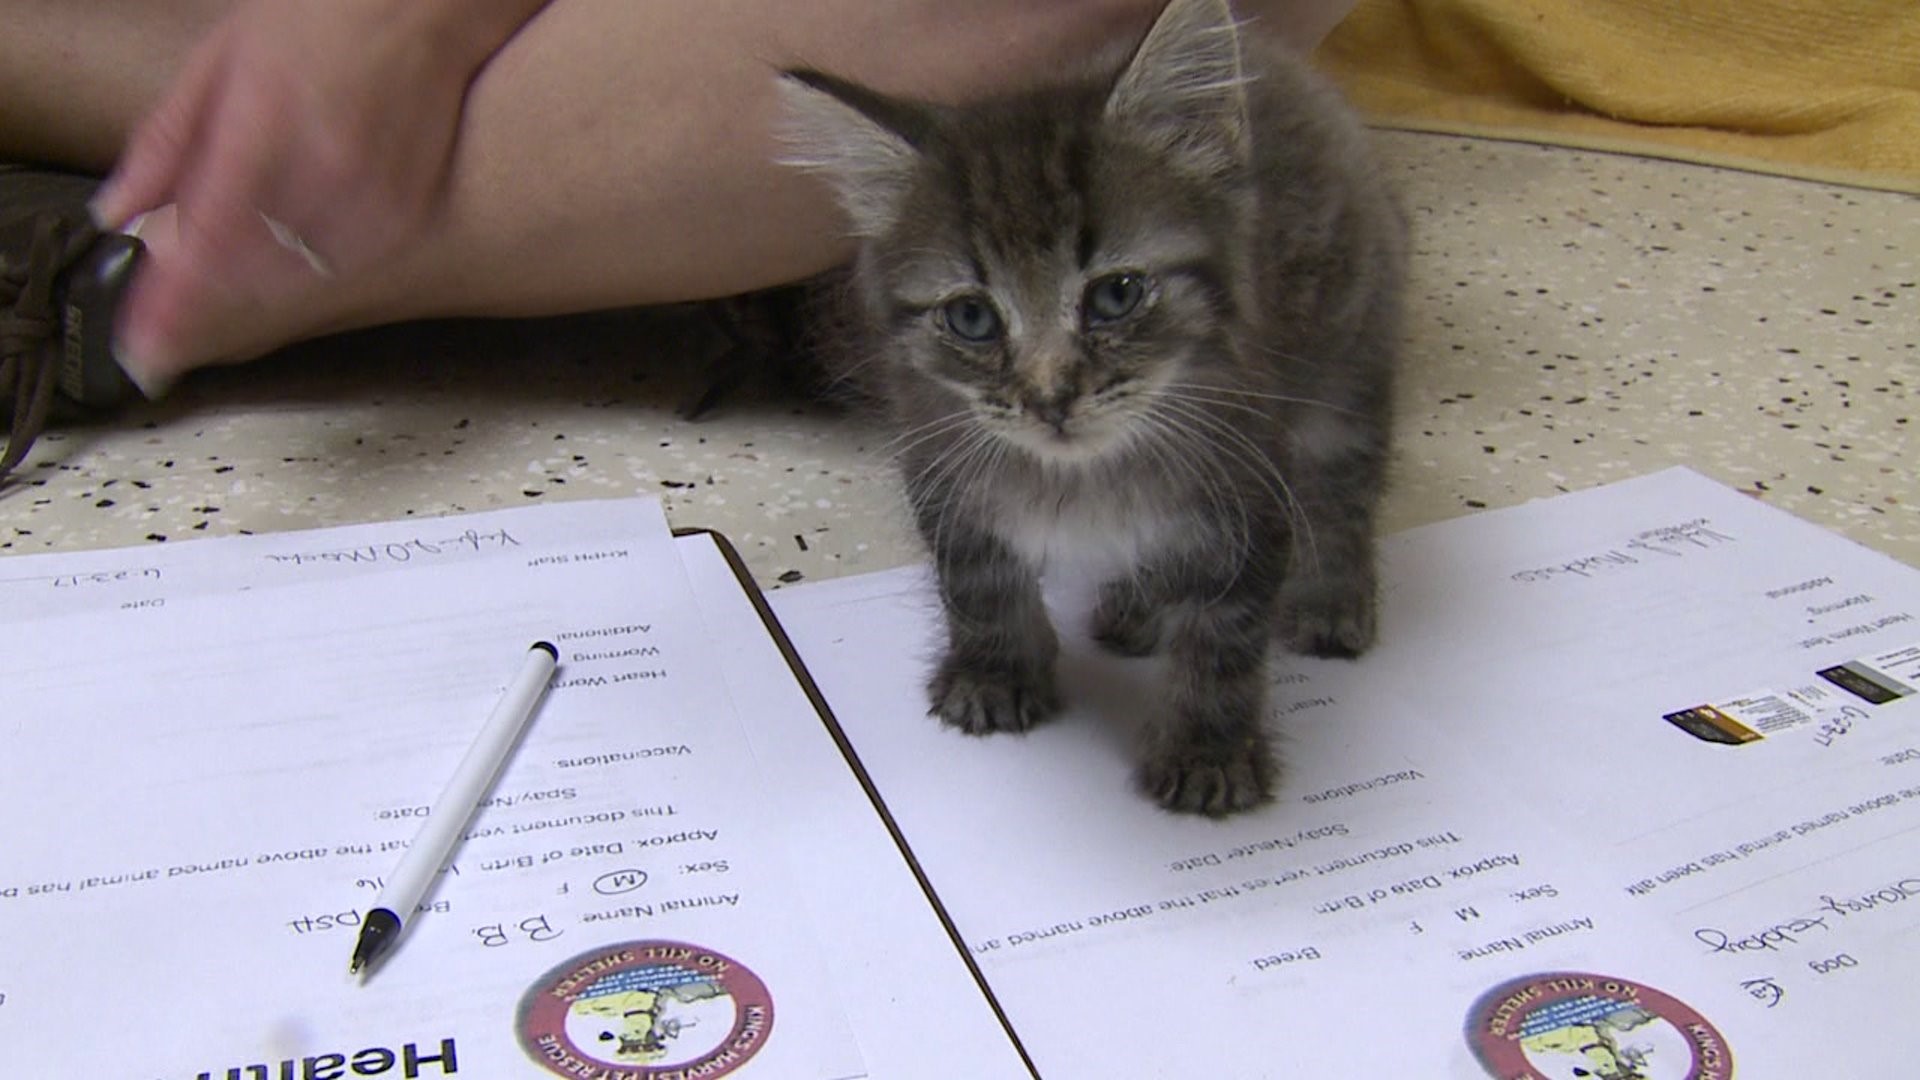 Dozens of cats receive names and love after rescue